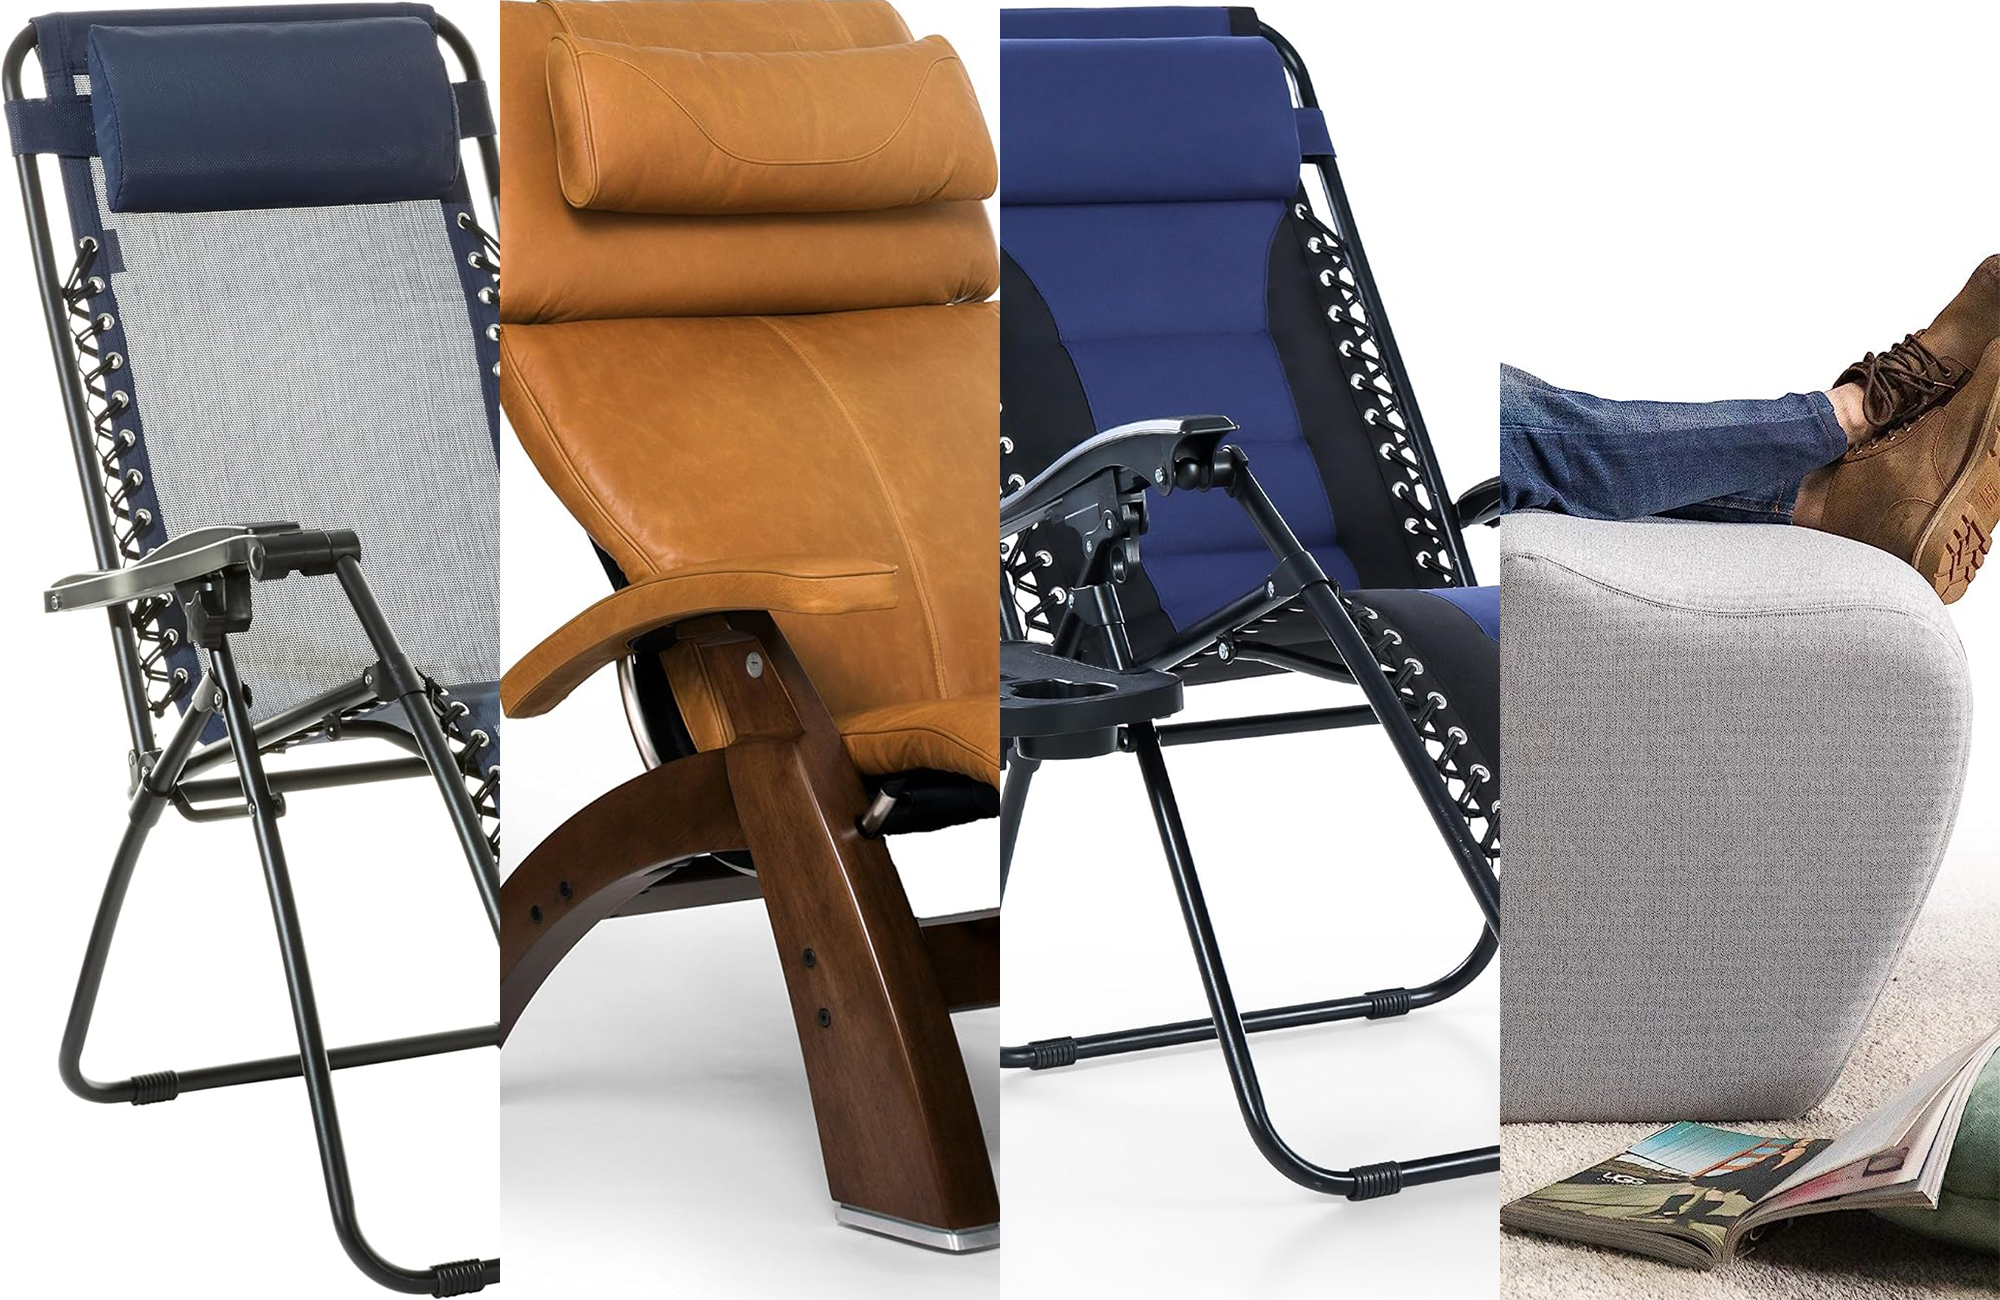 The 13 Coolest Chairs on the Planet